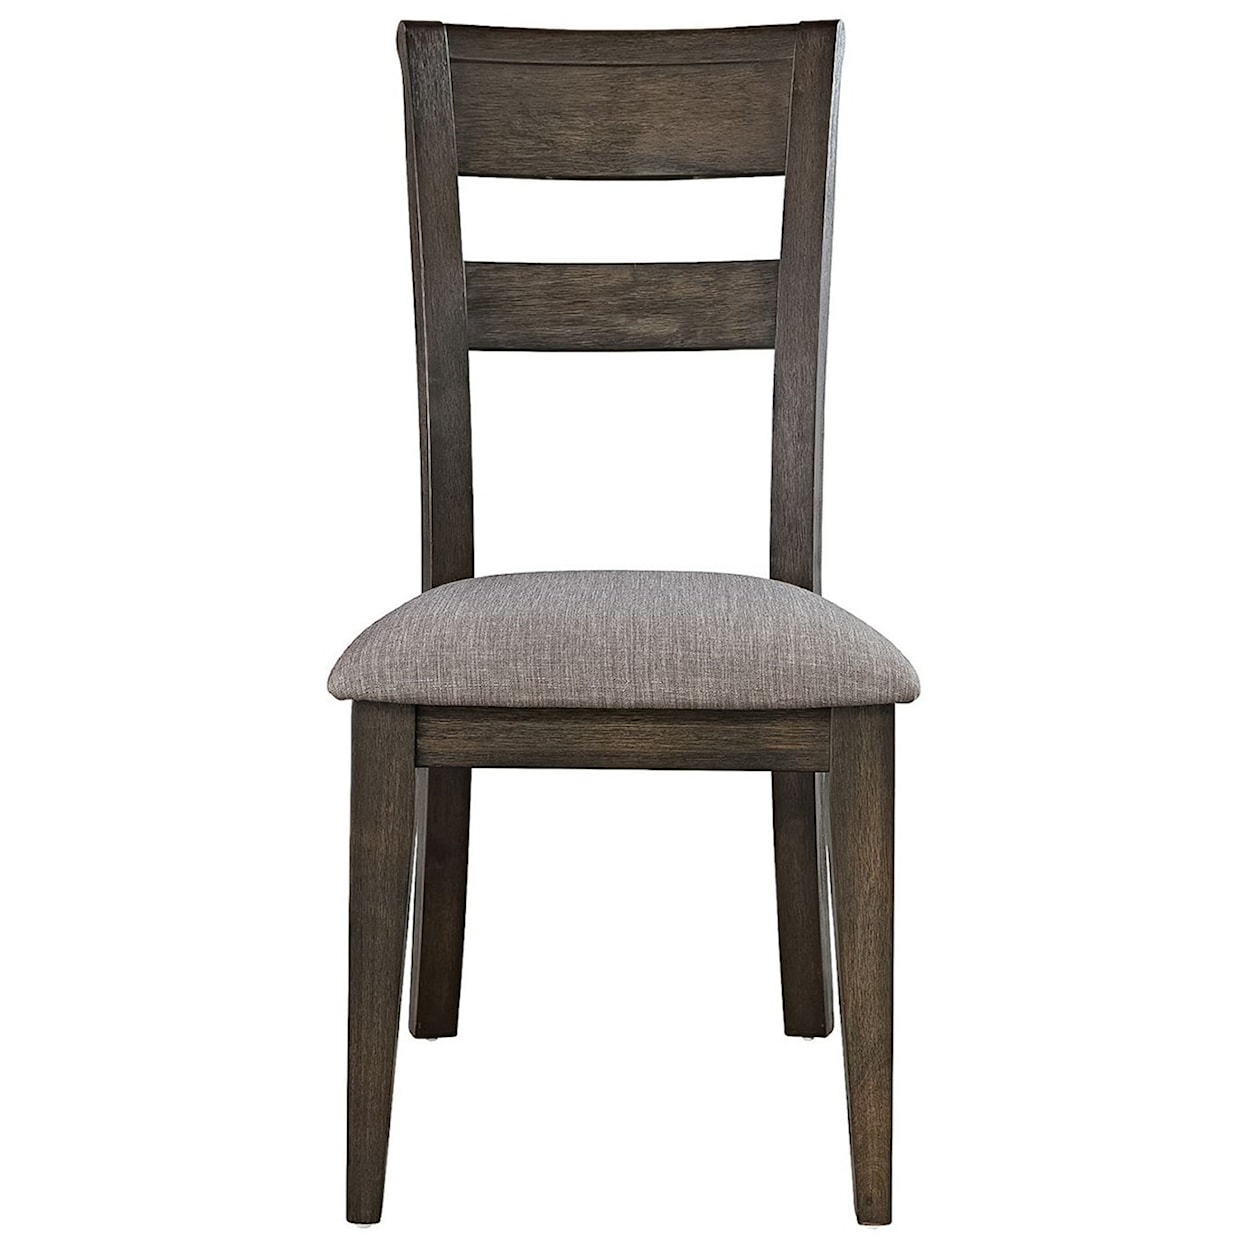 Libby Double Bridge Open Back Side Dining Chair